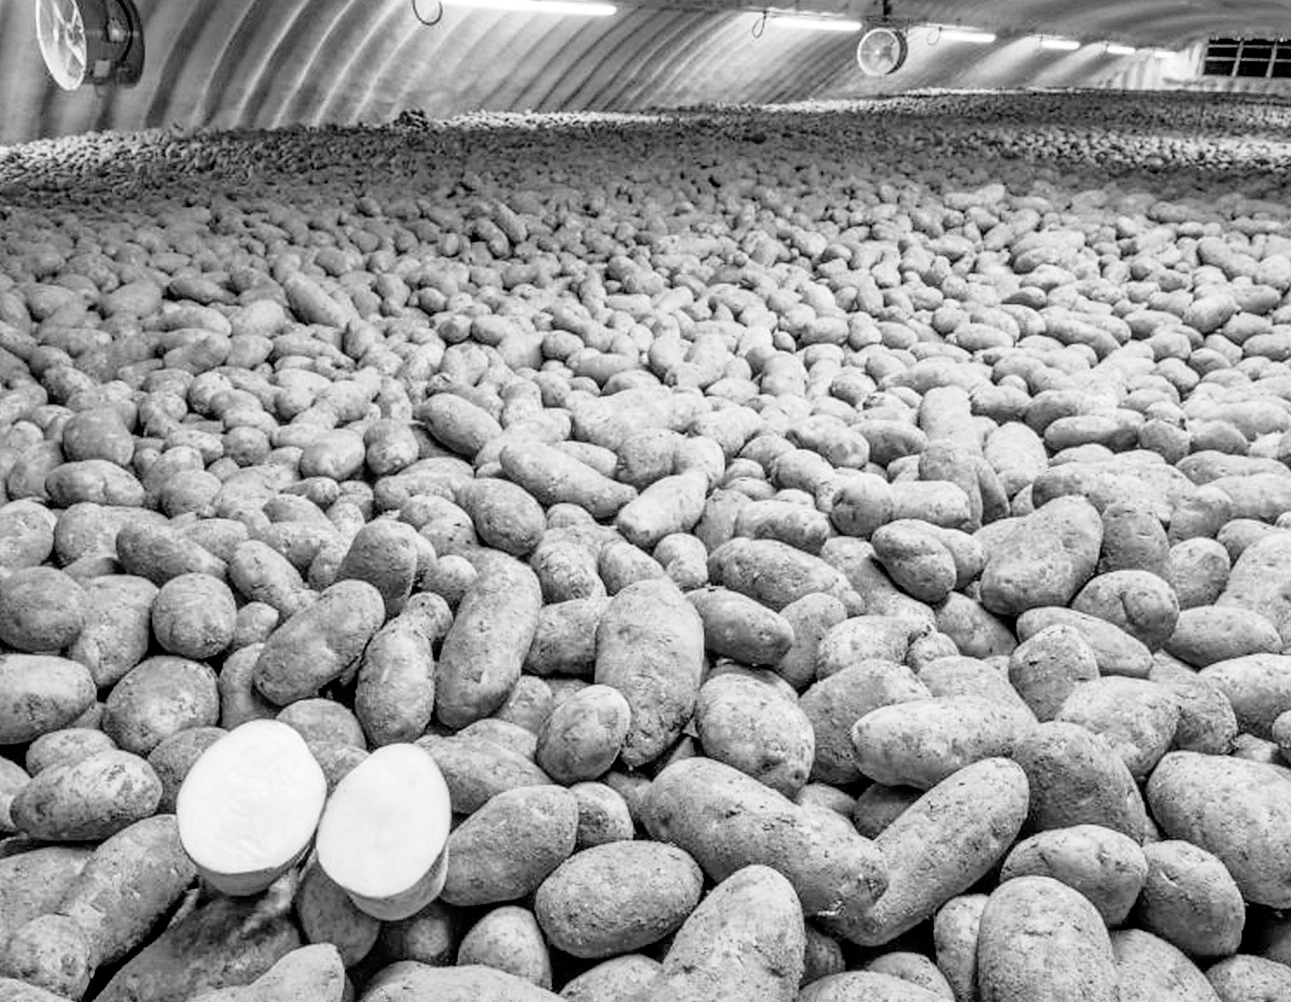 A Simplot storage facility with gene-modified Russet Burbank potatoes, which resist bruising and, when fried, also produce less of a potentially harmful ingredient. nyt